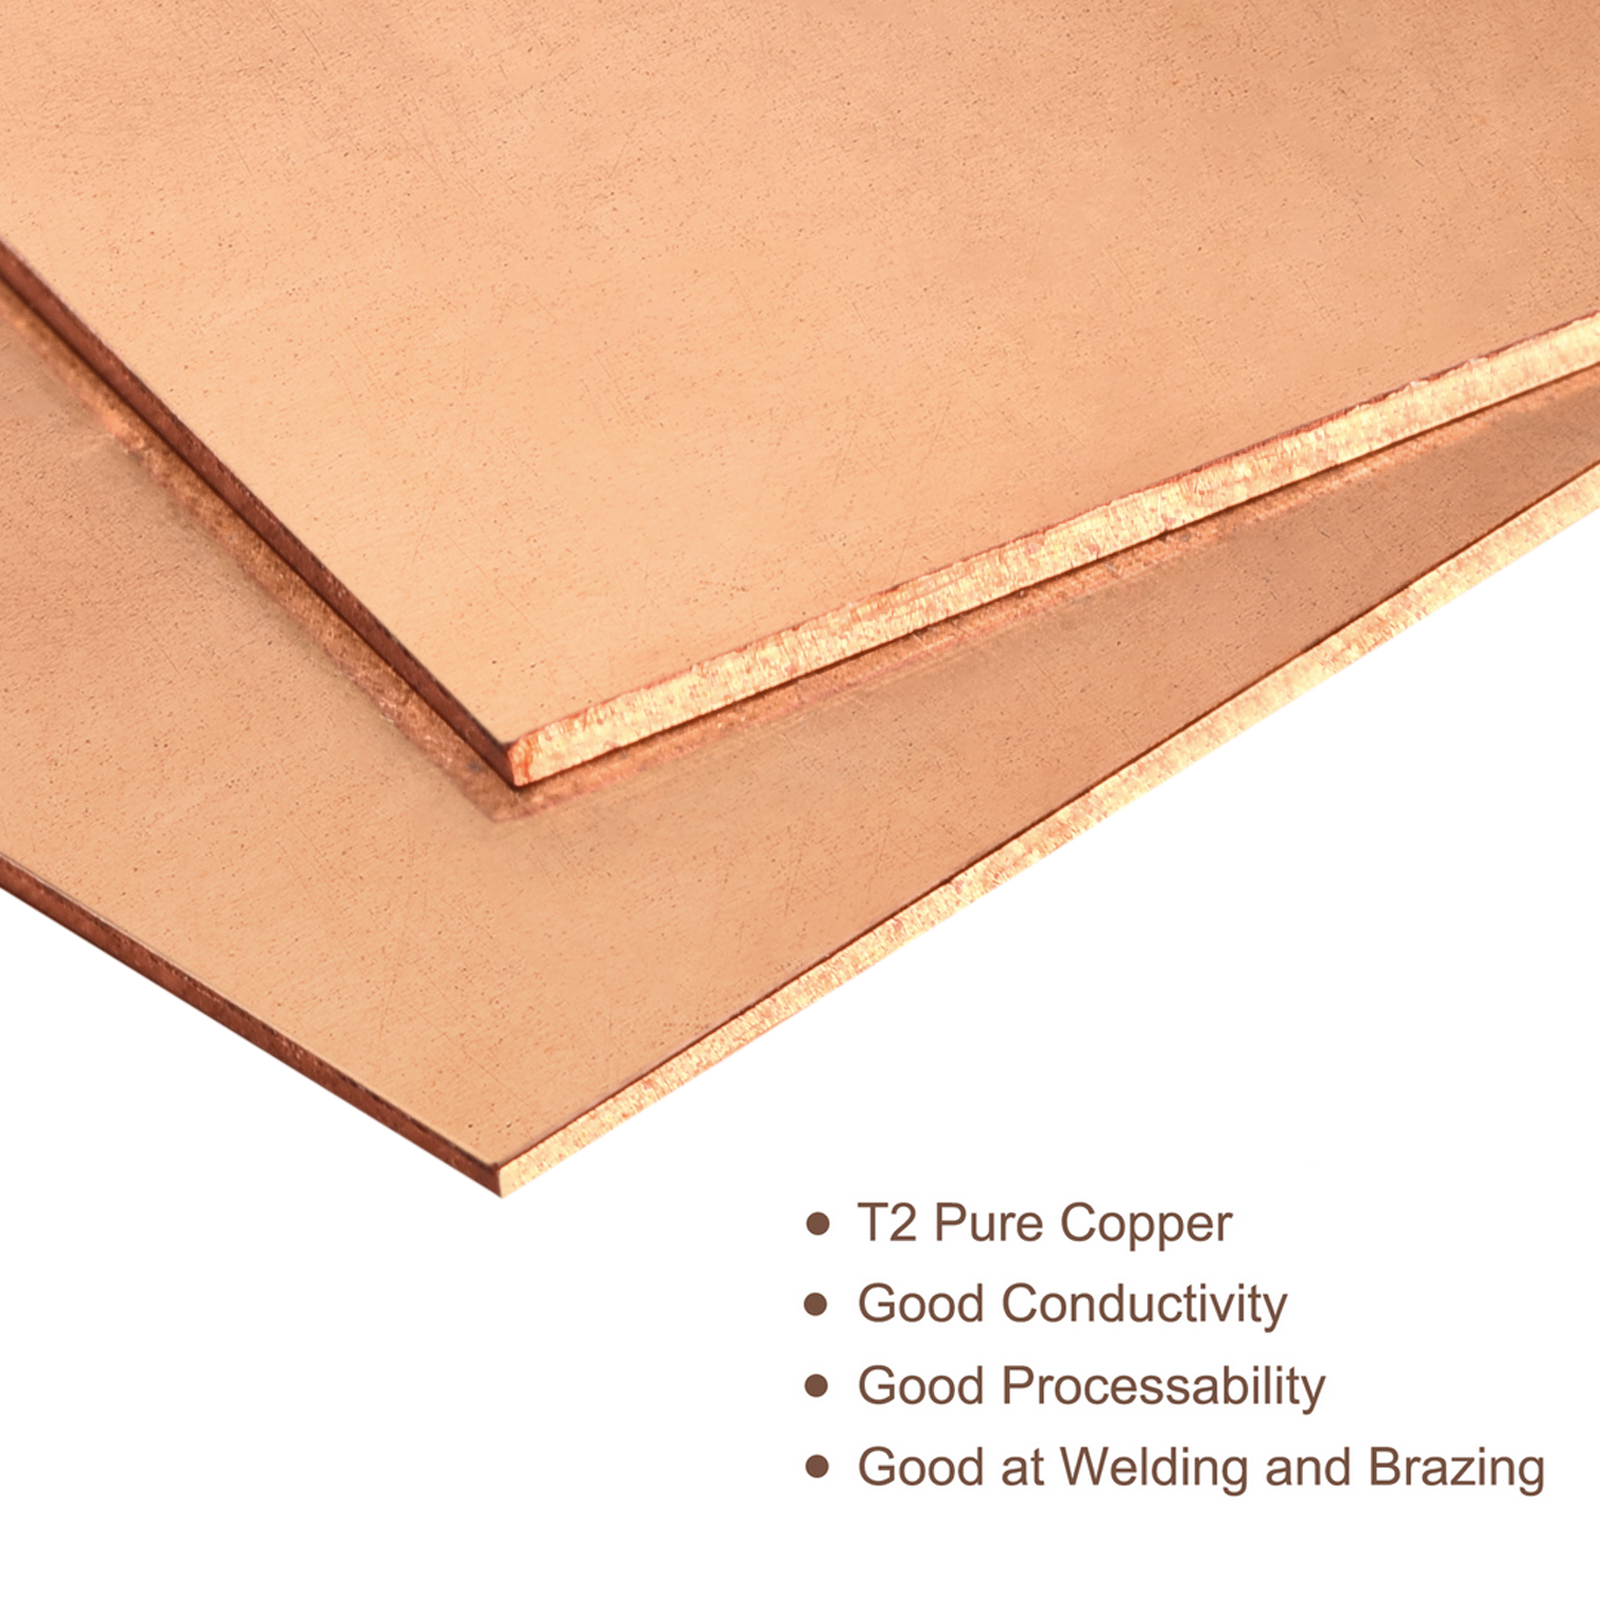 Uxcell Pure Copper Sheet, 2pcs 4 inch x 2 inch x 0.05 inch 16 Gauge T2 Copper Metal Plate for Crafts, Electrical Repairs, Size: 4 x 2 x 0.05, Bronze